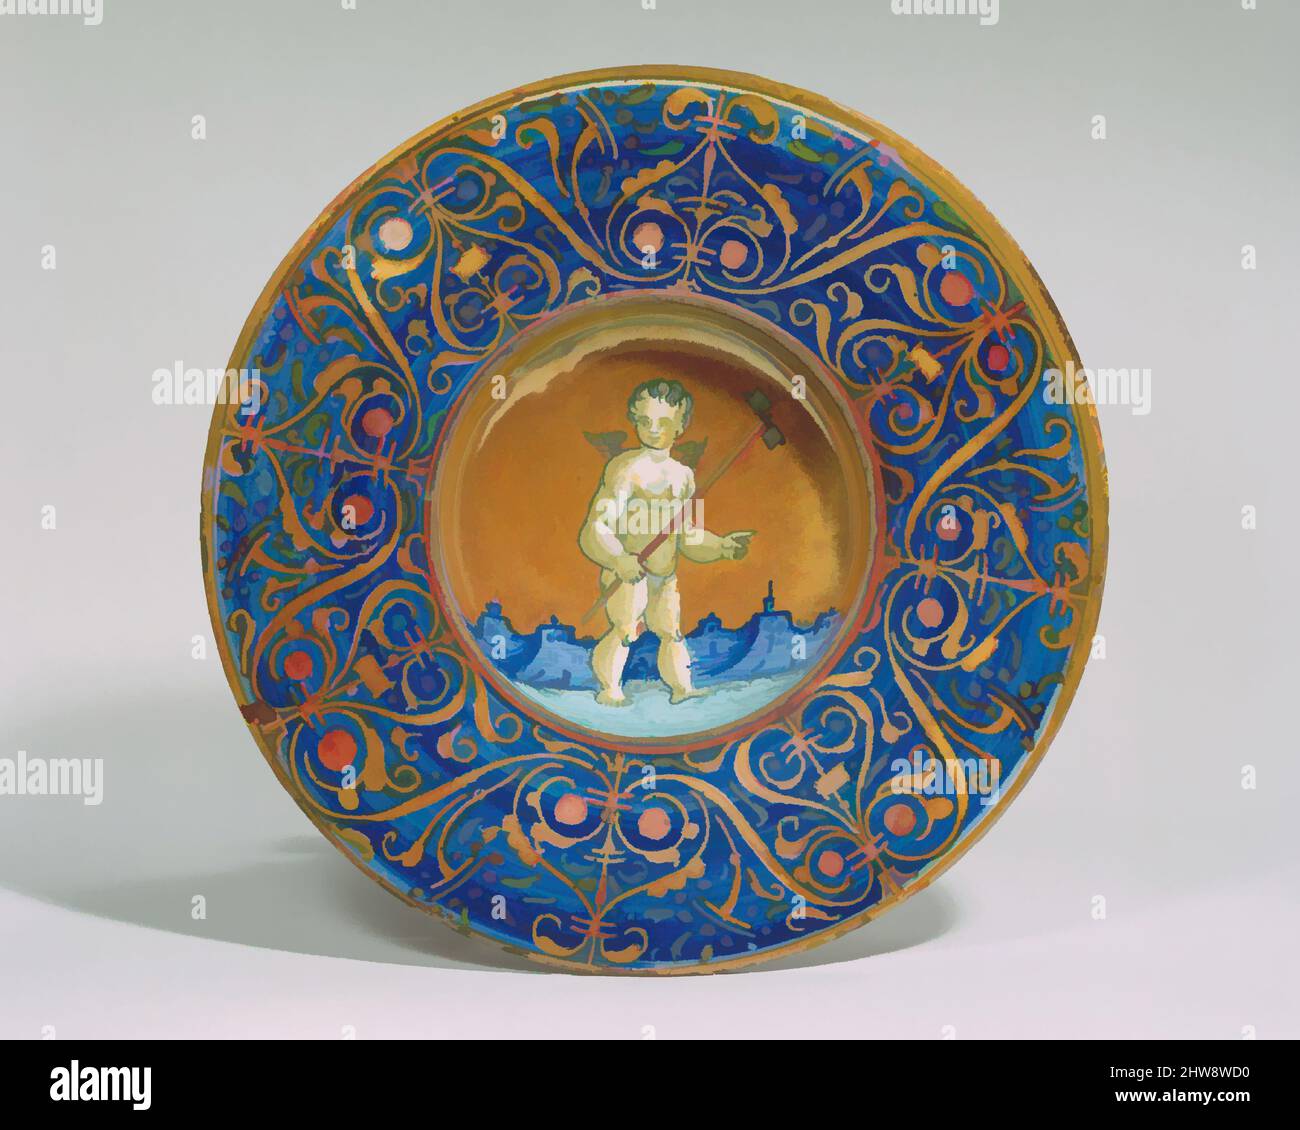 Art inspired by Dish (tondino), ca. 1530, Italian, Gubbio, Maiolica (tin-glazed earthenware), Diameter: 9 15/16 in. (25.2 cm), Ceramics-Pottery, Italian, Gubbio, early 16th century, This small lustered bowl is typical of ceramics made in Gubbio in the 1520s and 1530s. The meaning of, Classic works modernized by Artotop with a splash of modernity. Shapes, color and value, eye-catching visual impact on art. Emotions through freedom of artworks in a contemporary way. A timeless message pursuing a wildly creative new direction. Artists turning to the digital medium and creating the Artotop NFT Stock Photo